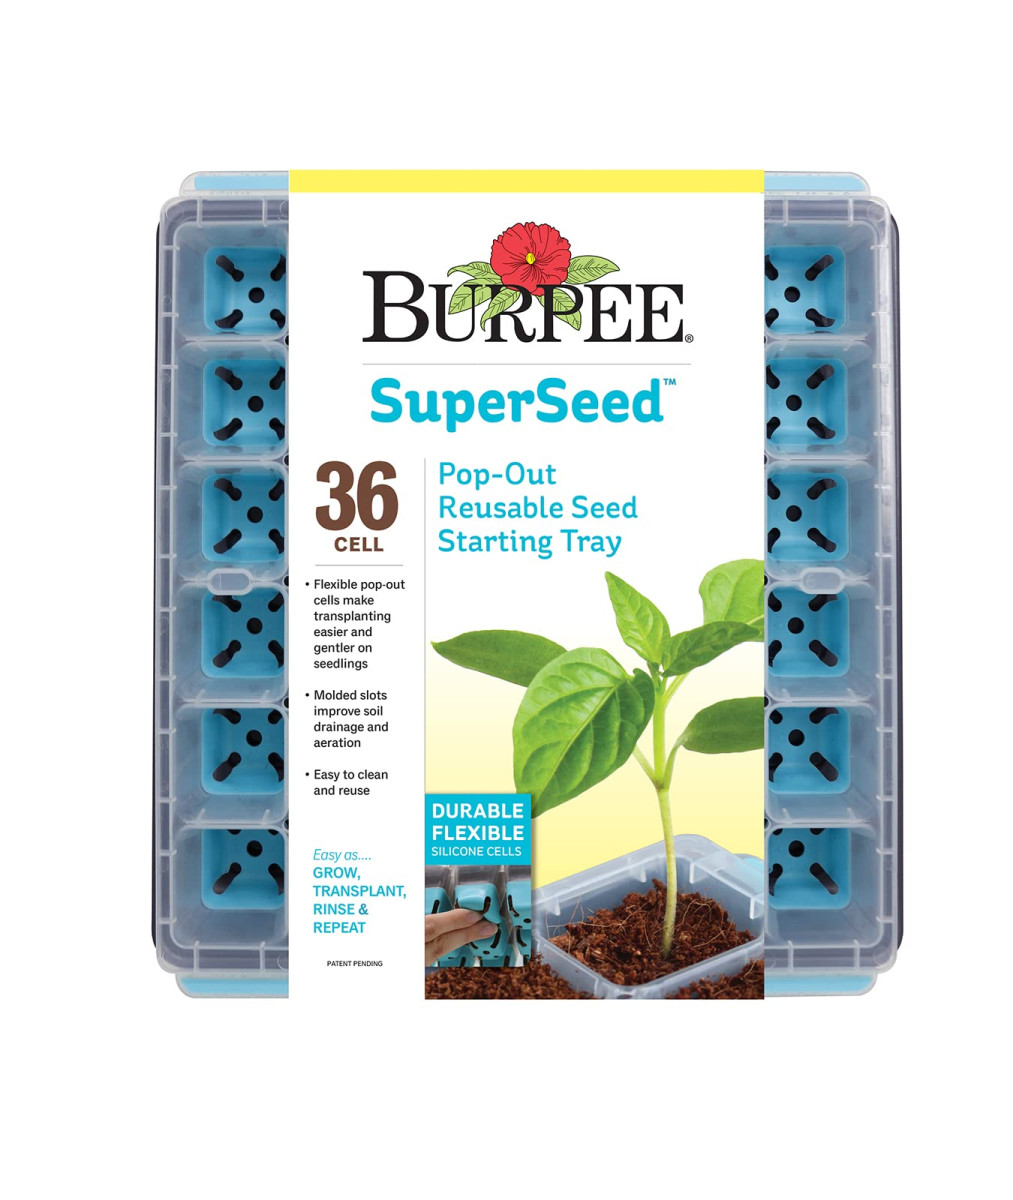 A burpee seed starting tray with 36 pop-out cells, showcasing two young seedlings, featured on a clear plastic casing with product details.